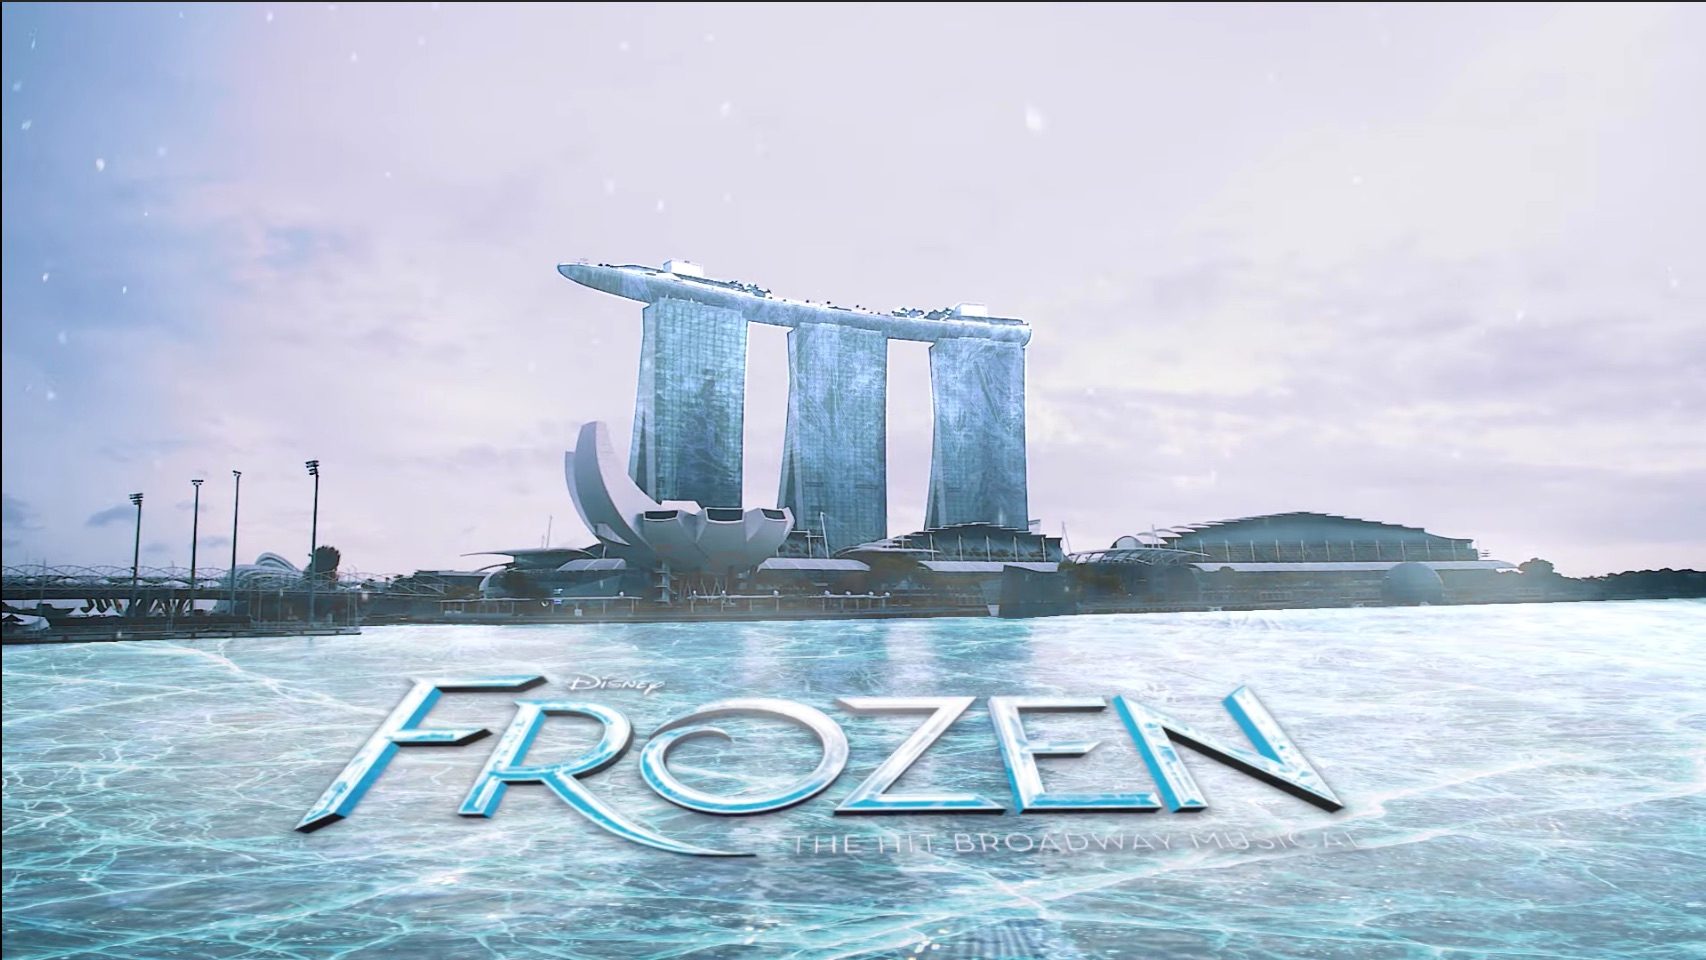 ‘Frozen’ musical is heading to Singapore